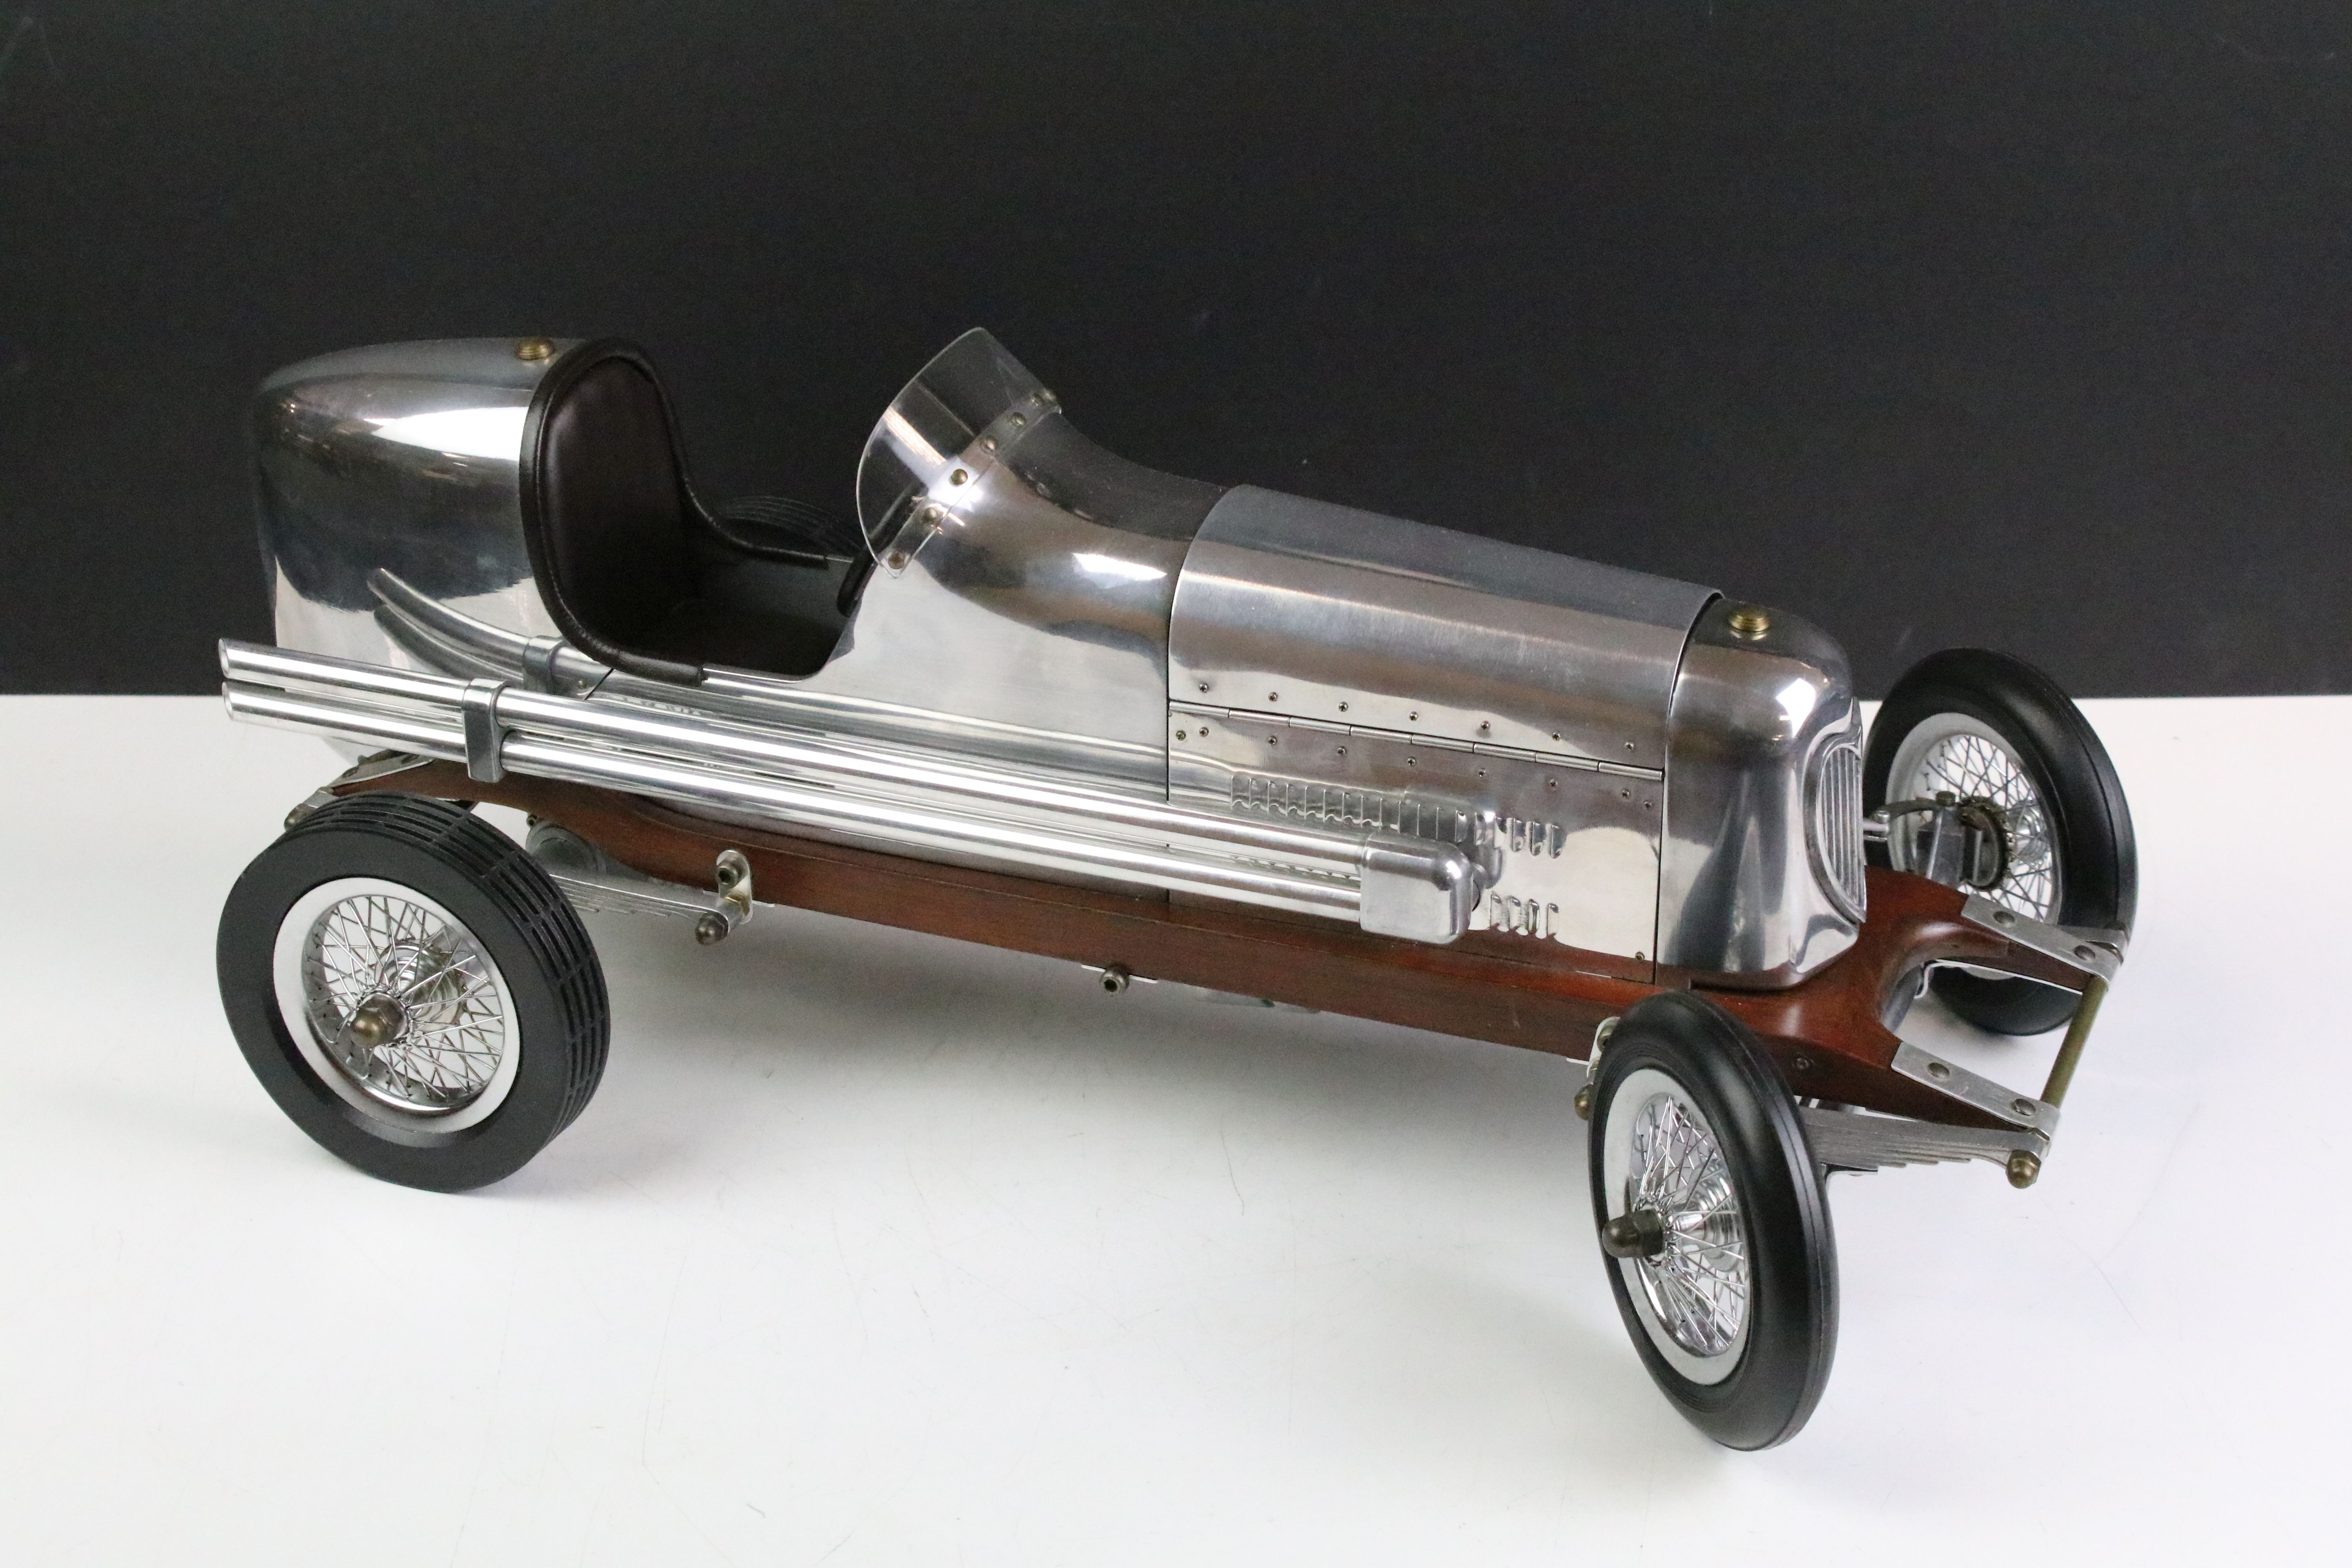 Mid to late 20th C scratch built metal and wooden model racing car, the body in aluminum with